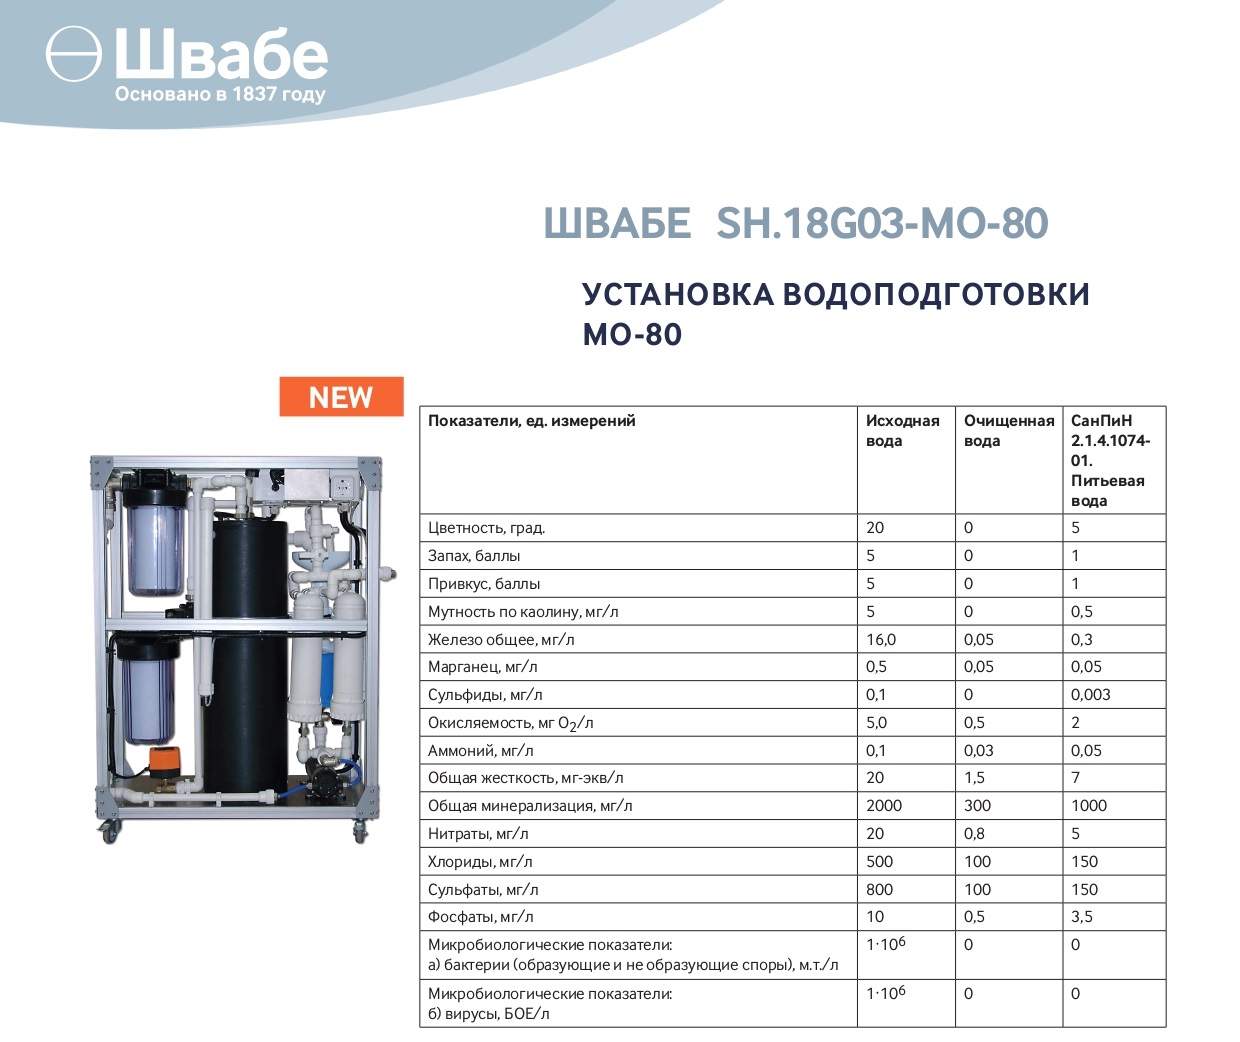 Installation of water treatment MO-80